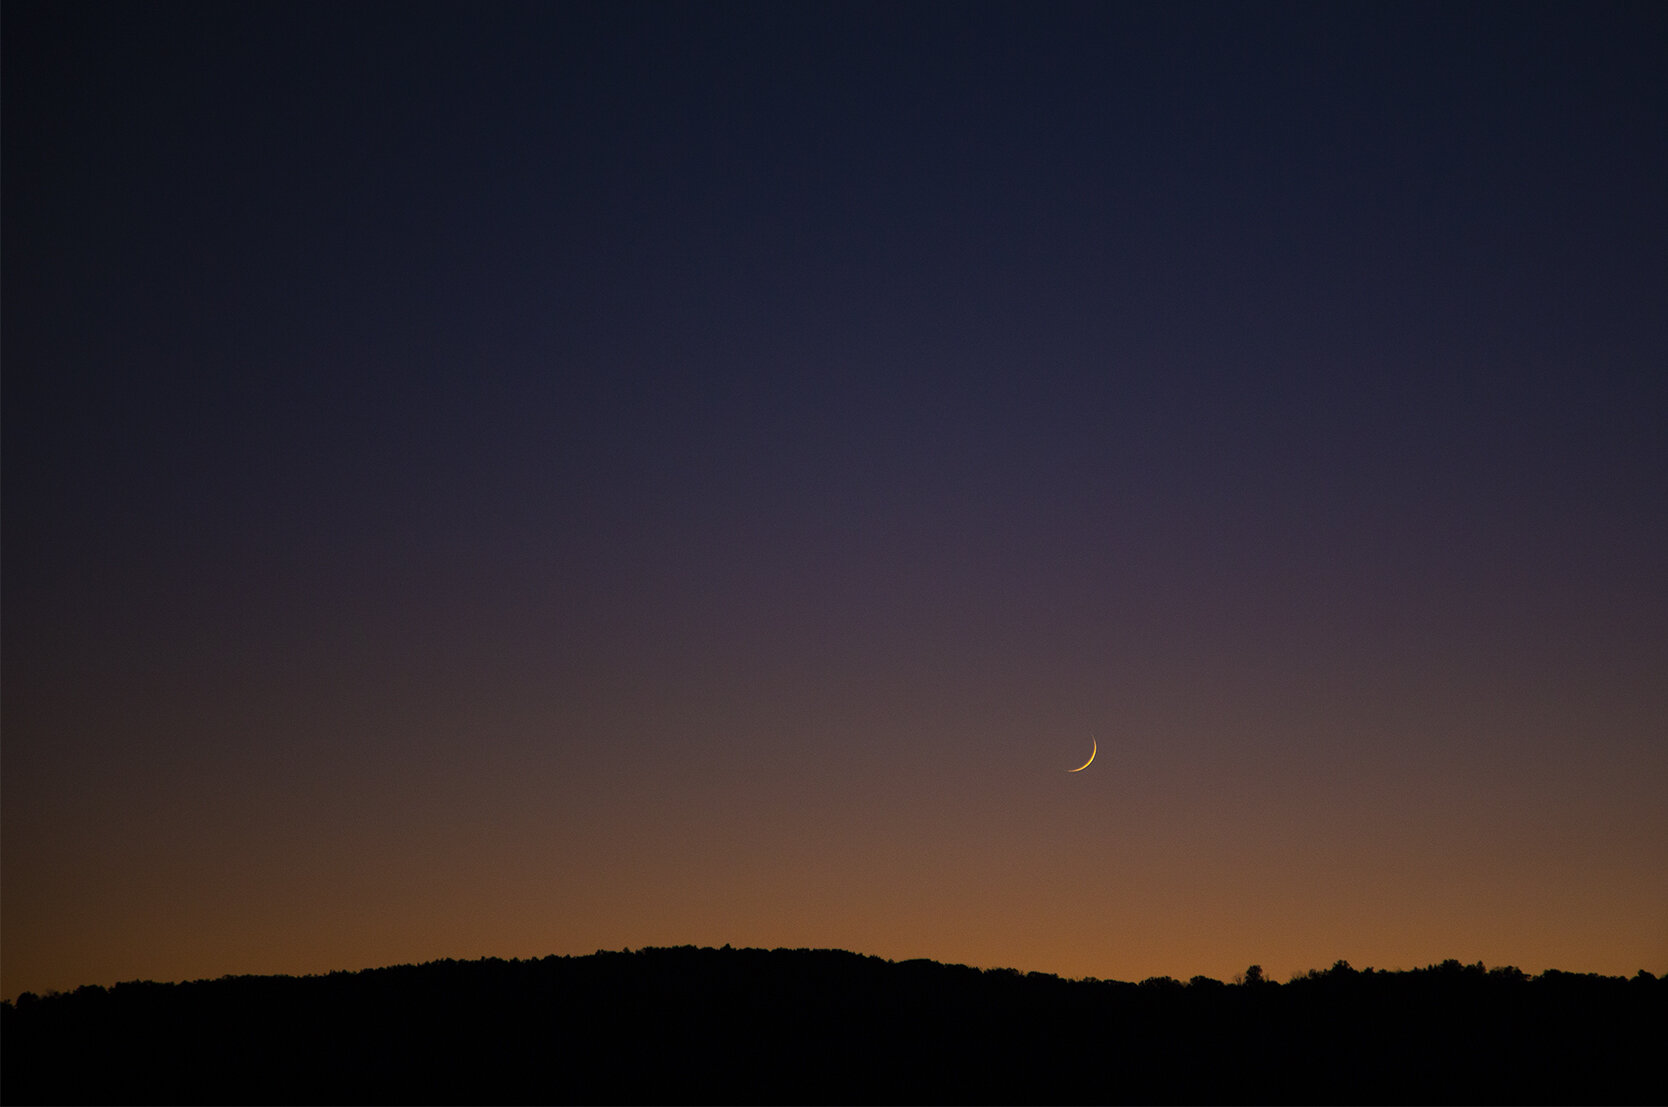  Moonrise in Frederick County, Maryland 